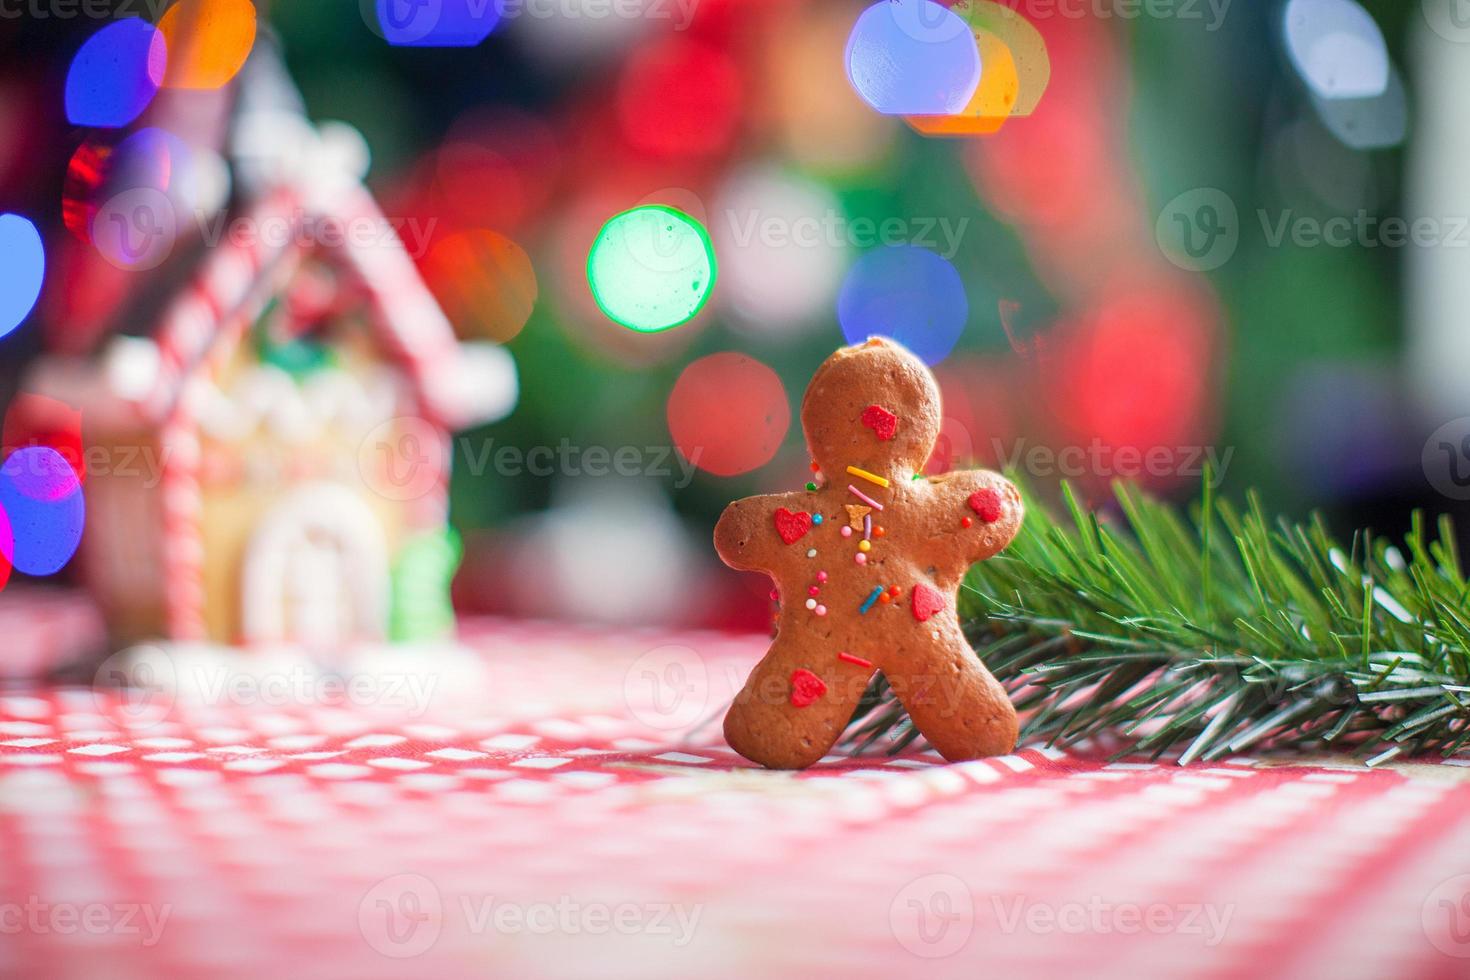 Gingerbread man background candy ginger house and Christmas tree lights photo